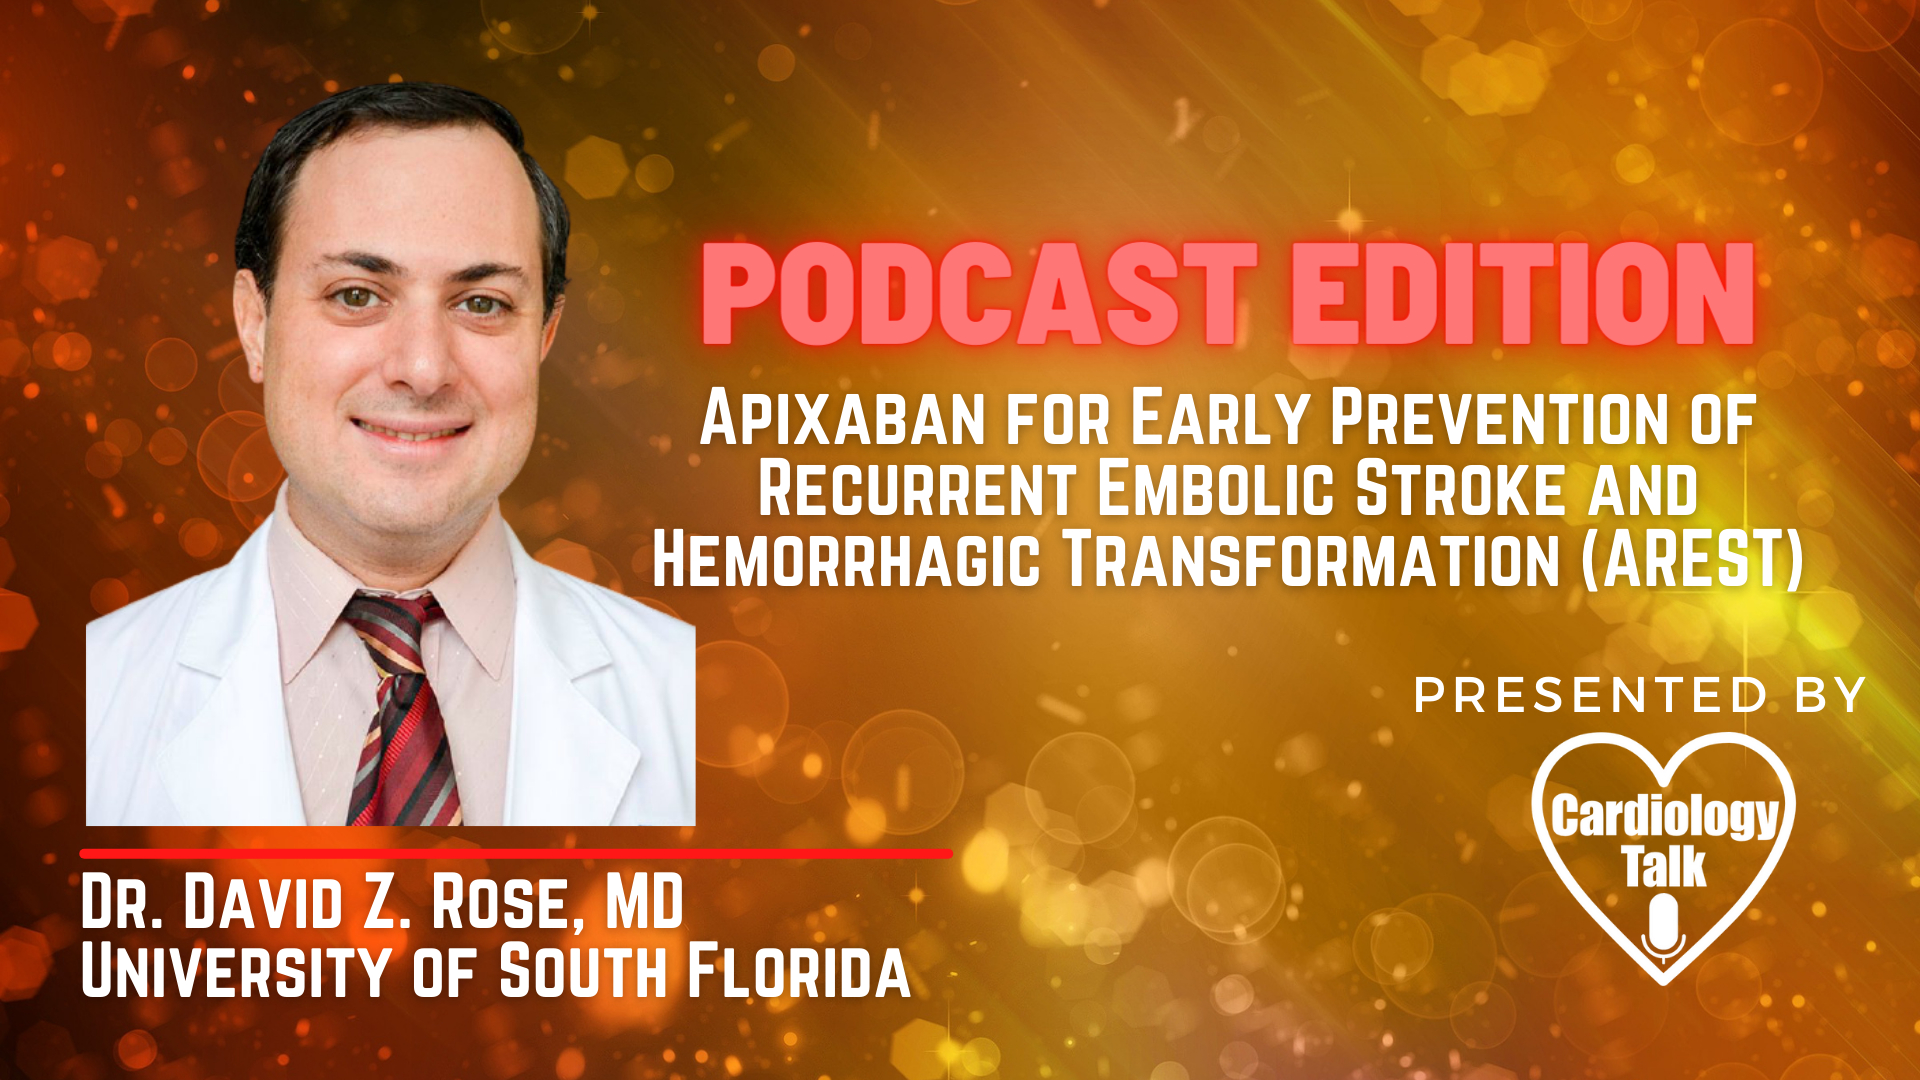 Podcast- Dr. David Z. Rose, MD - Apixaban for Early Prevention of Recurrent Embolic Stroke and Hemorrhagic Transformation (AREST) @DrStroke   @USFHealth  #ARESTtrial #Stroke #Cardiology #...